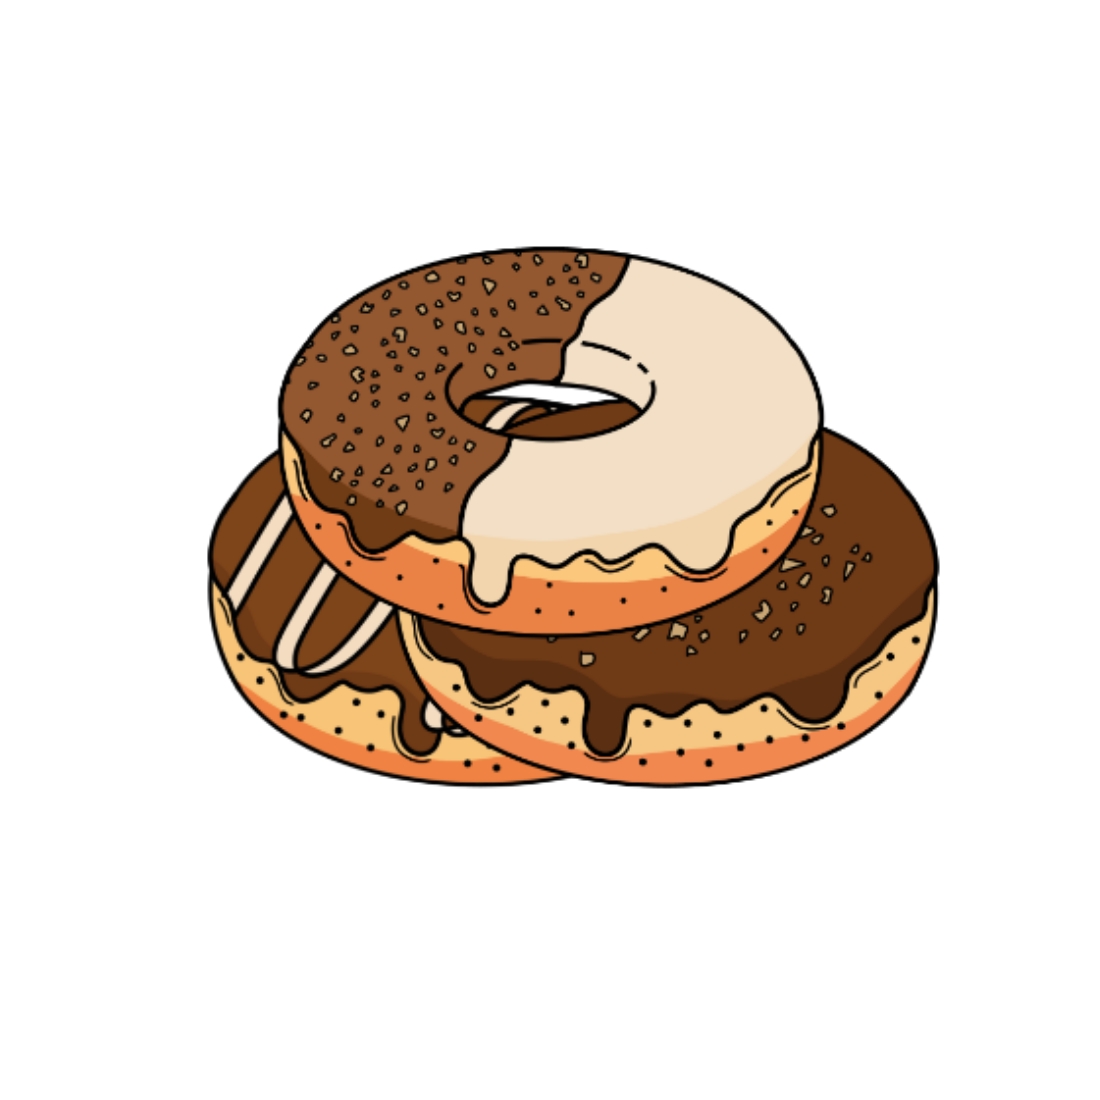 Donut Sticker Pack with chocolate.